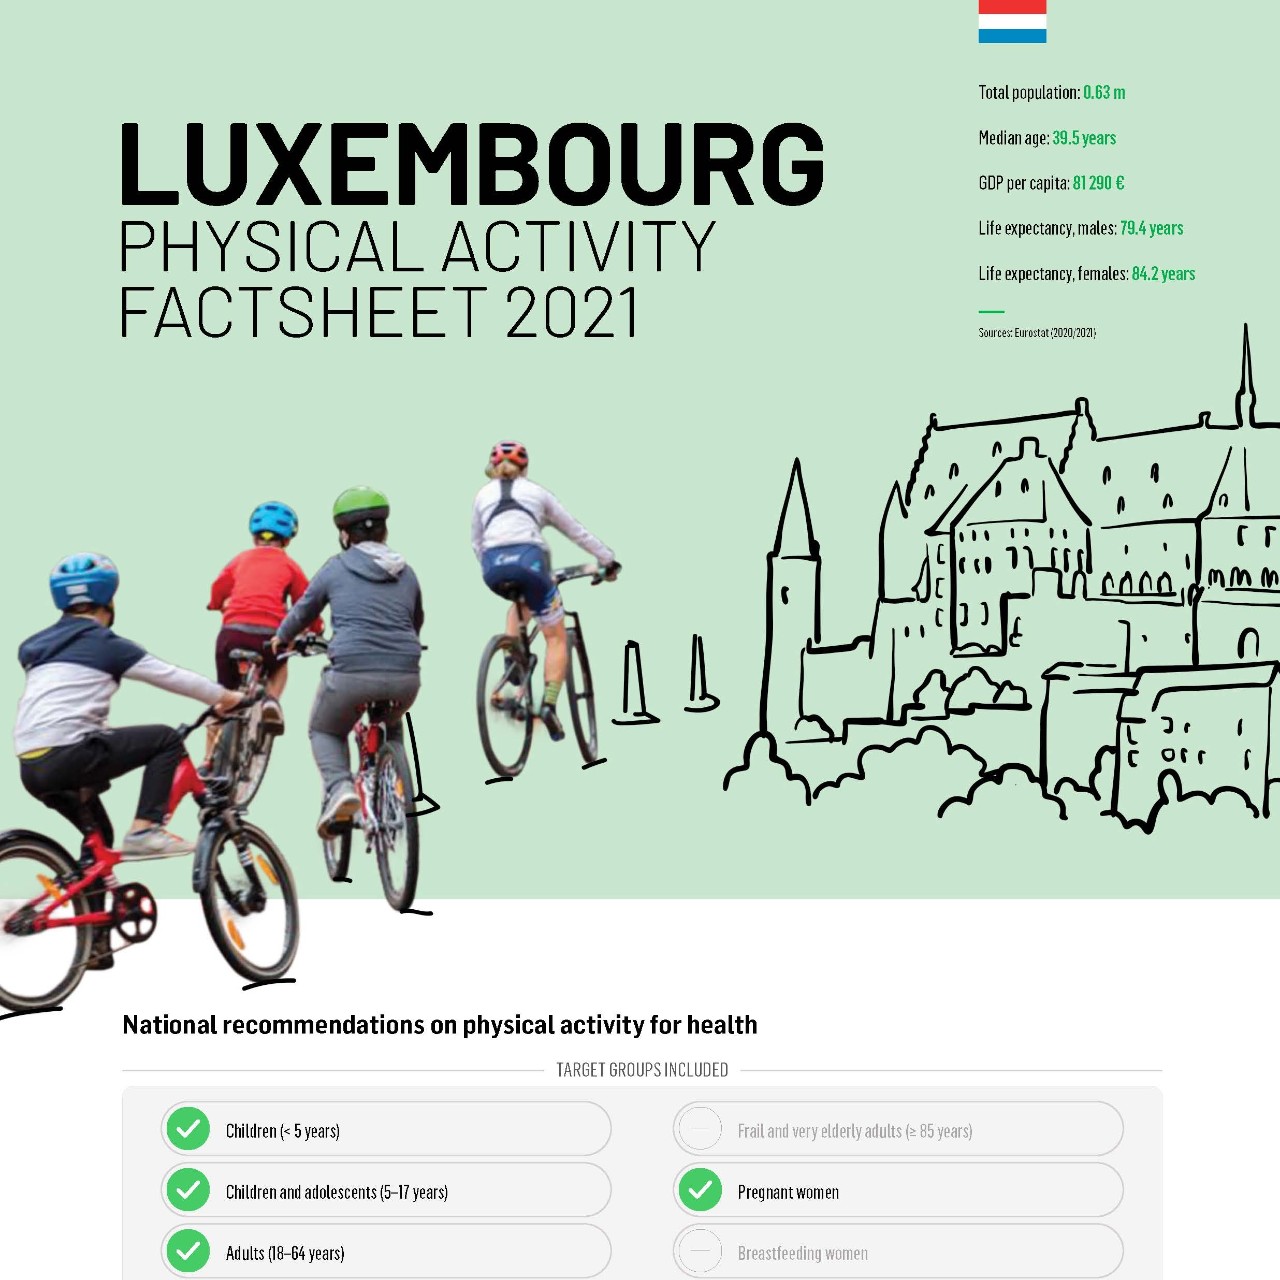 Luxembourg-Physical Activity Factsheet 2021